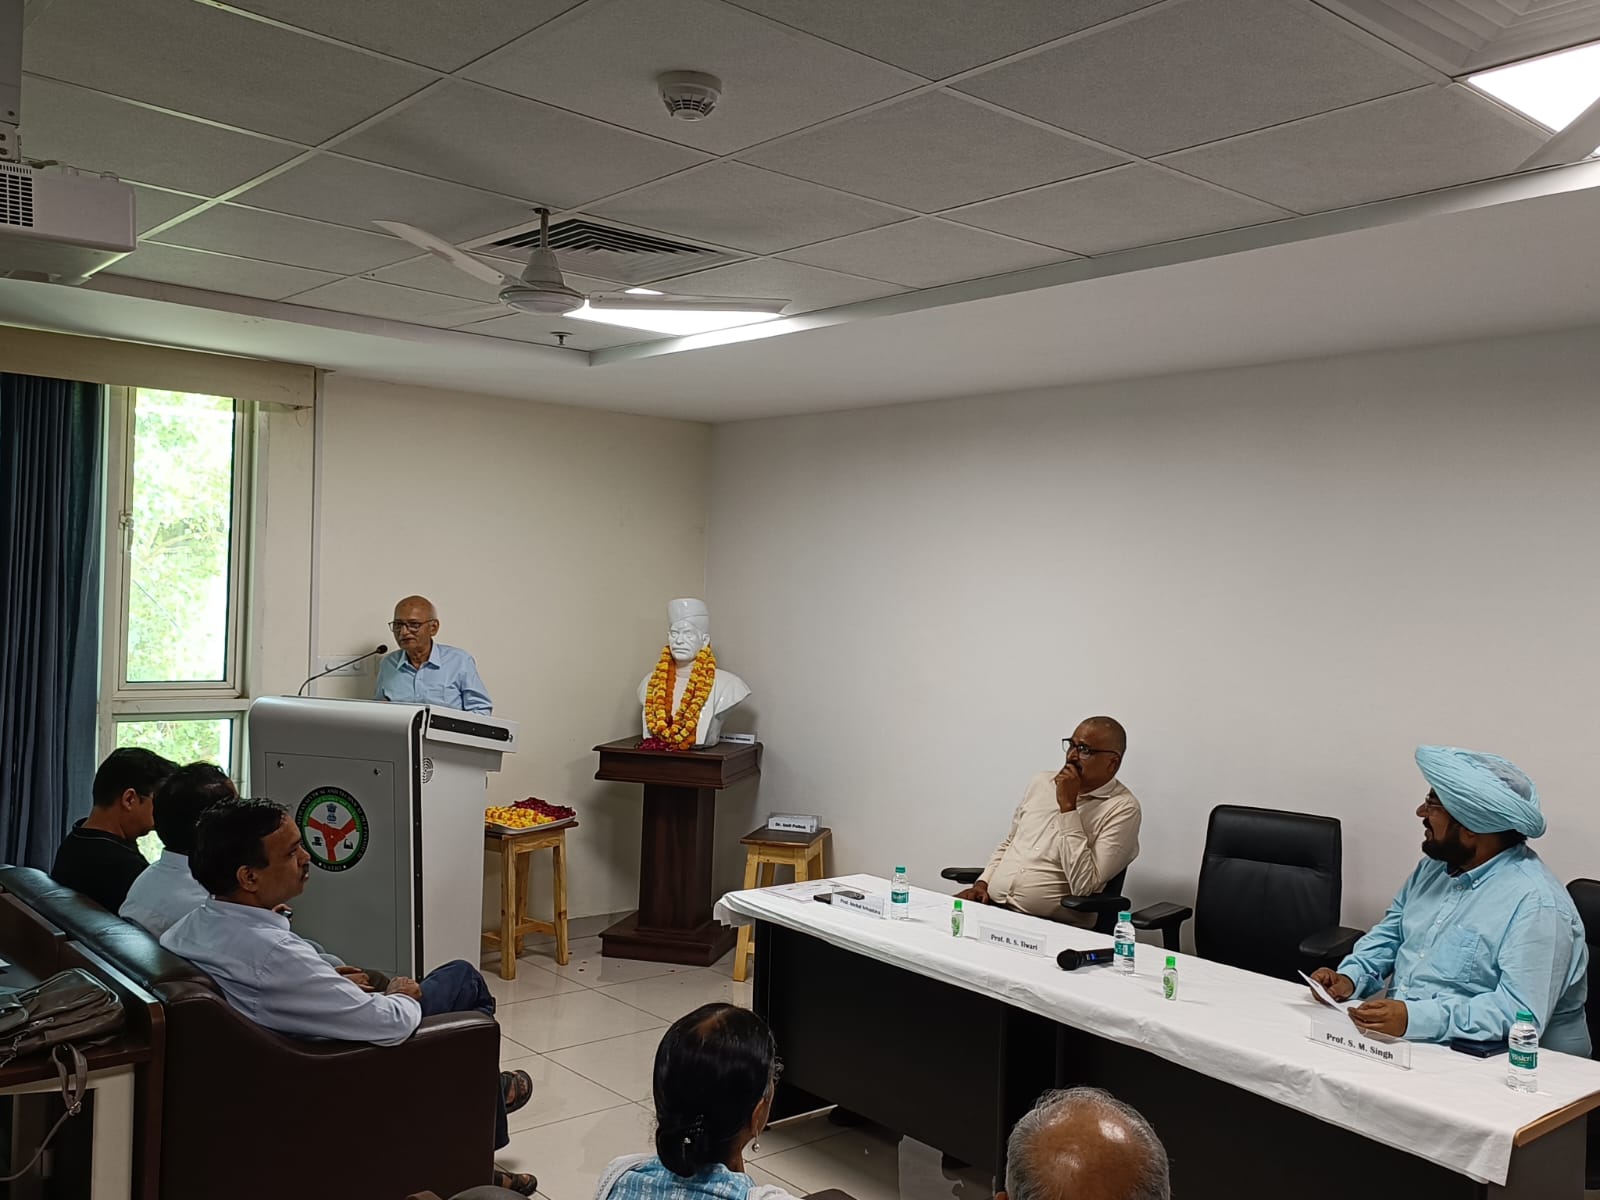 Valedictory Function Guest of Honor Address: Prof R S Tiwari, Distinguish Professor, Former Head, Dept of Phy ISc, BHU